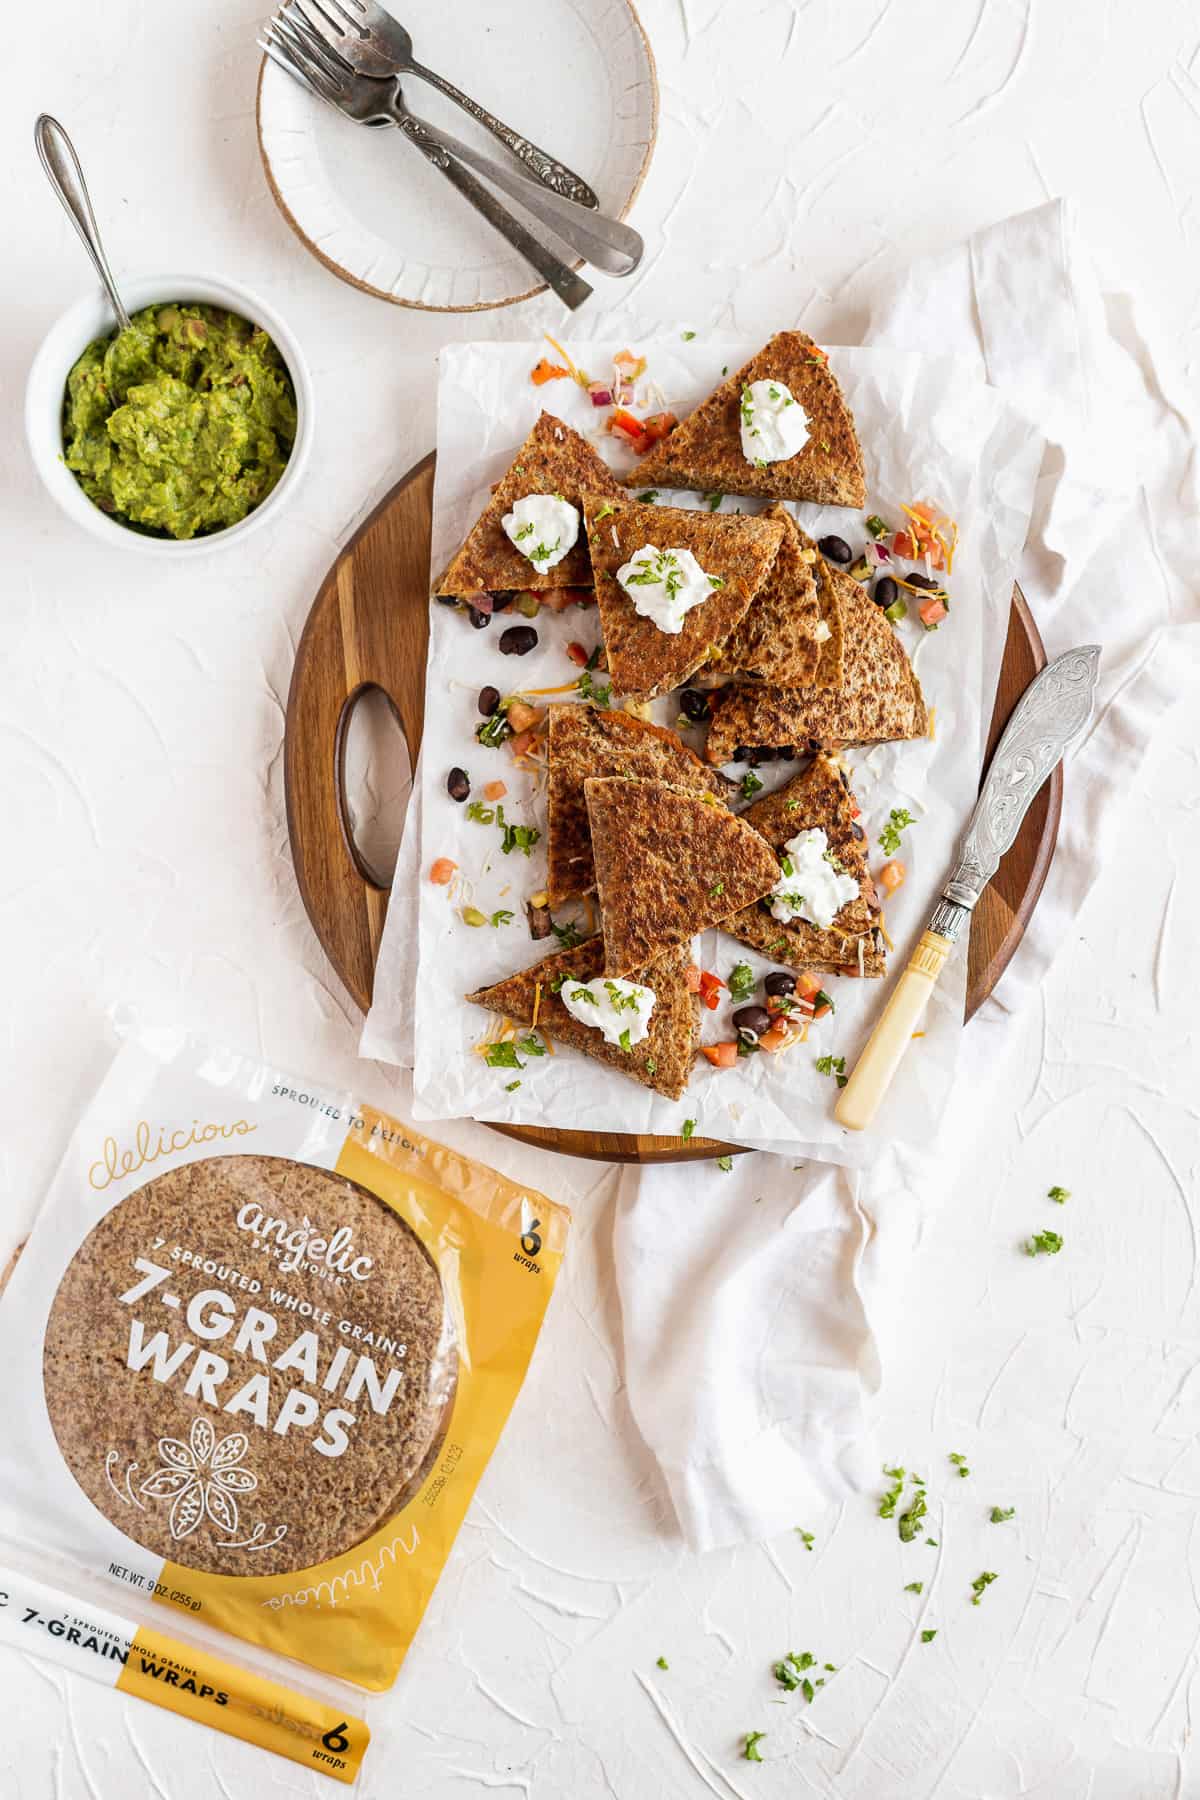 Overhead photo of Southwest Quesadilla triangles stacked on parchment paper on a wooden tray.  A bowl of guacamole and small plates with forks are sitting nearby.  A bag of Angelic Bakehouse 7 Grain Wraps is also nearby.  